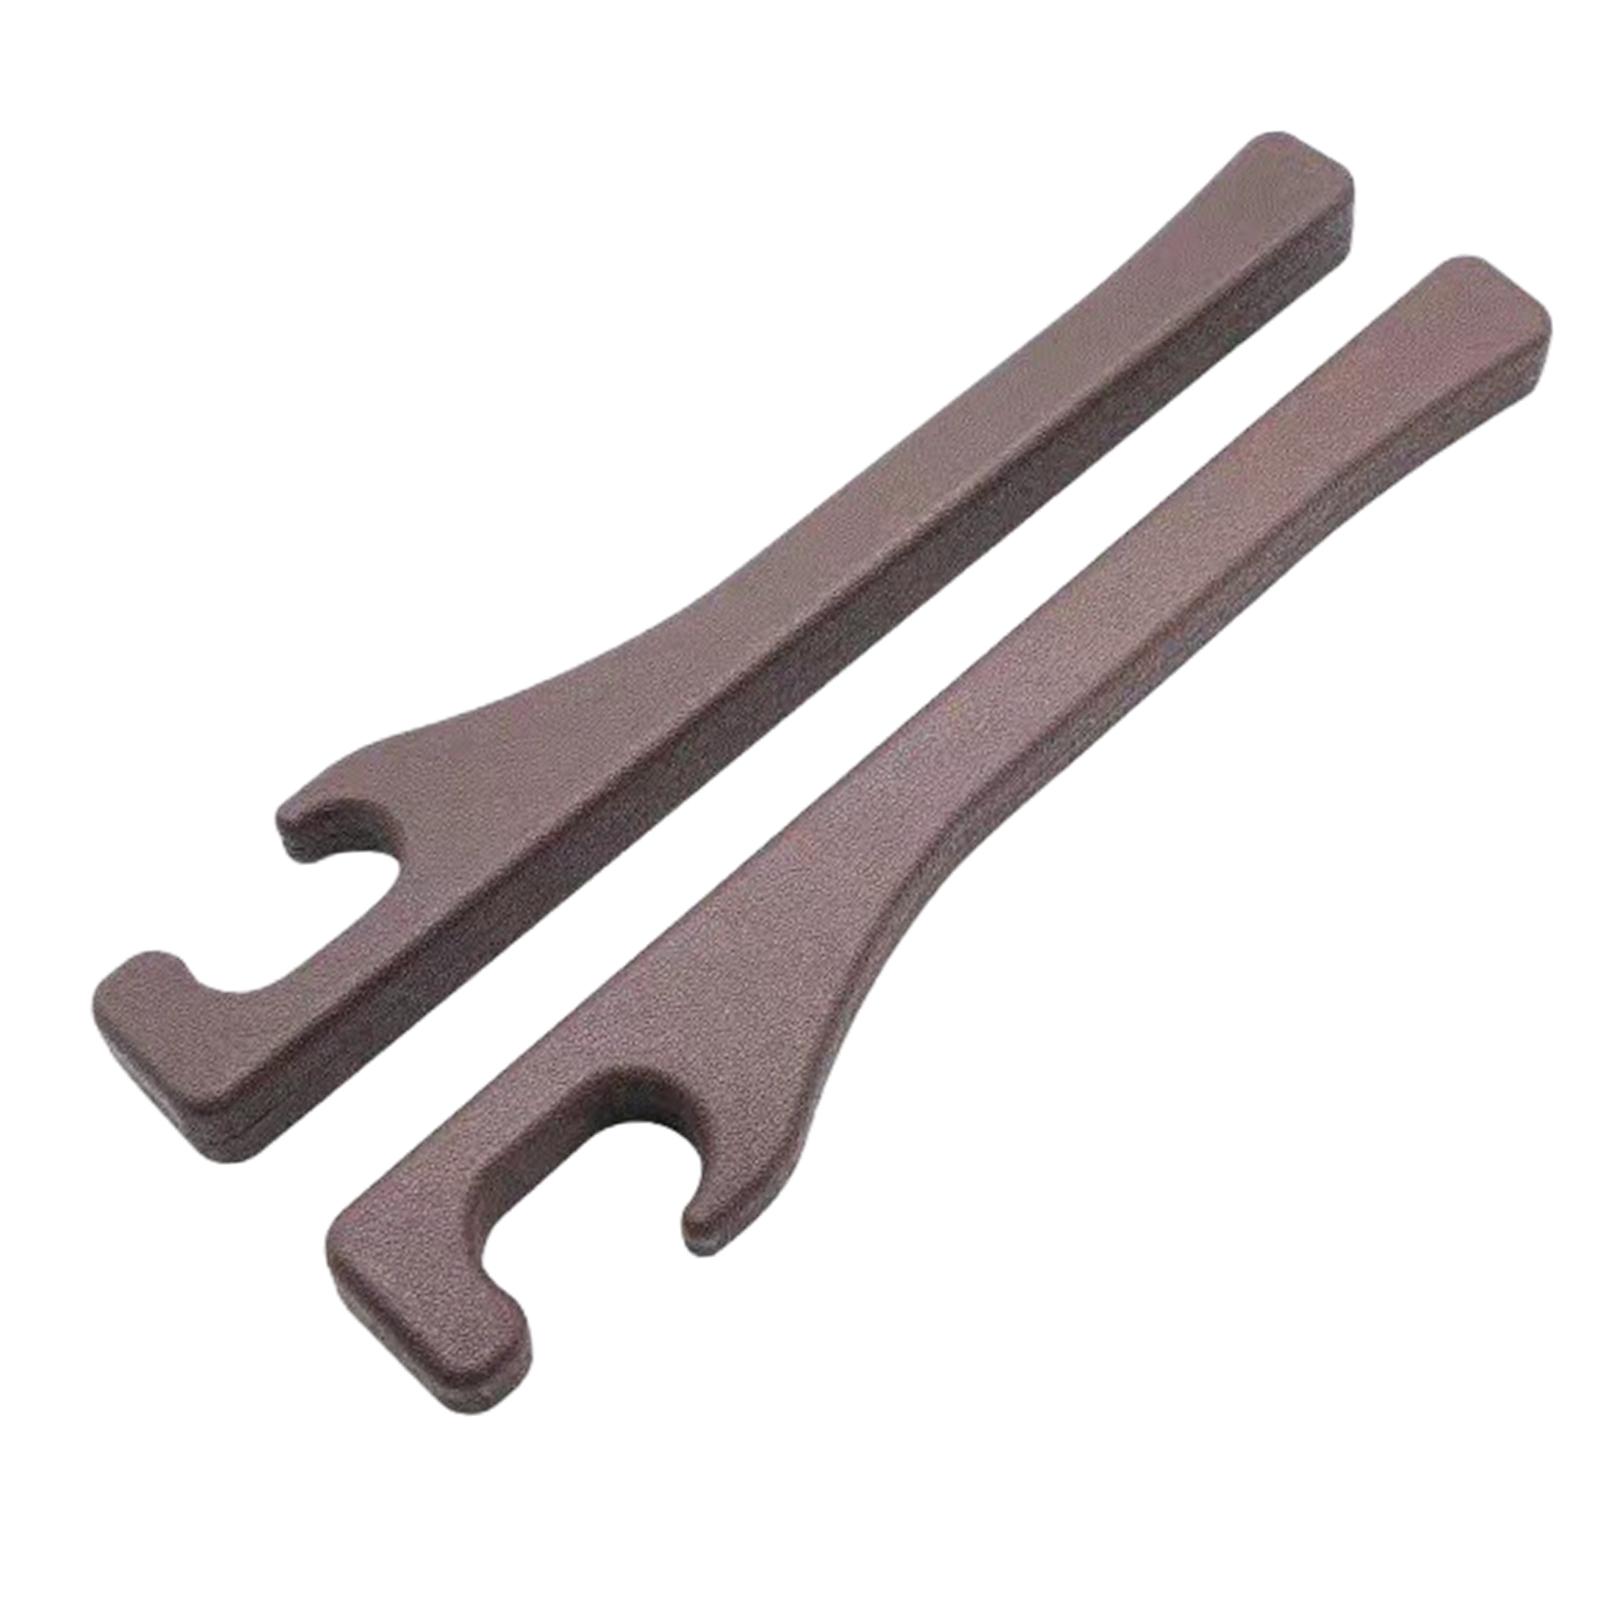 2 Pieces Car Seat Gap Filler Easy Installation for Cars Automobiles SUV Brown